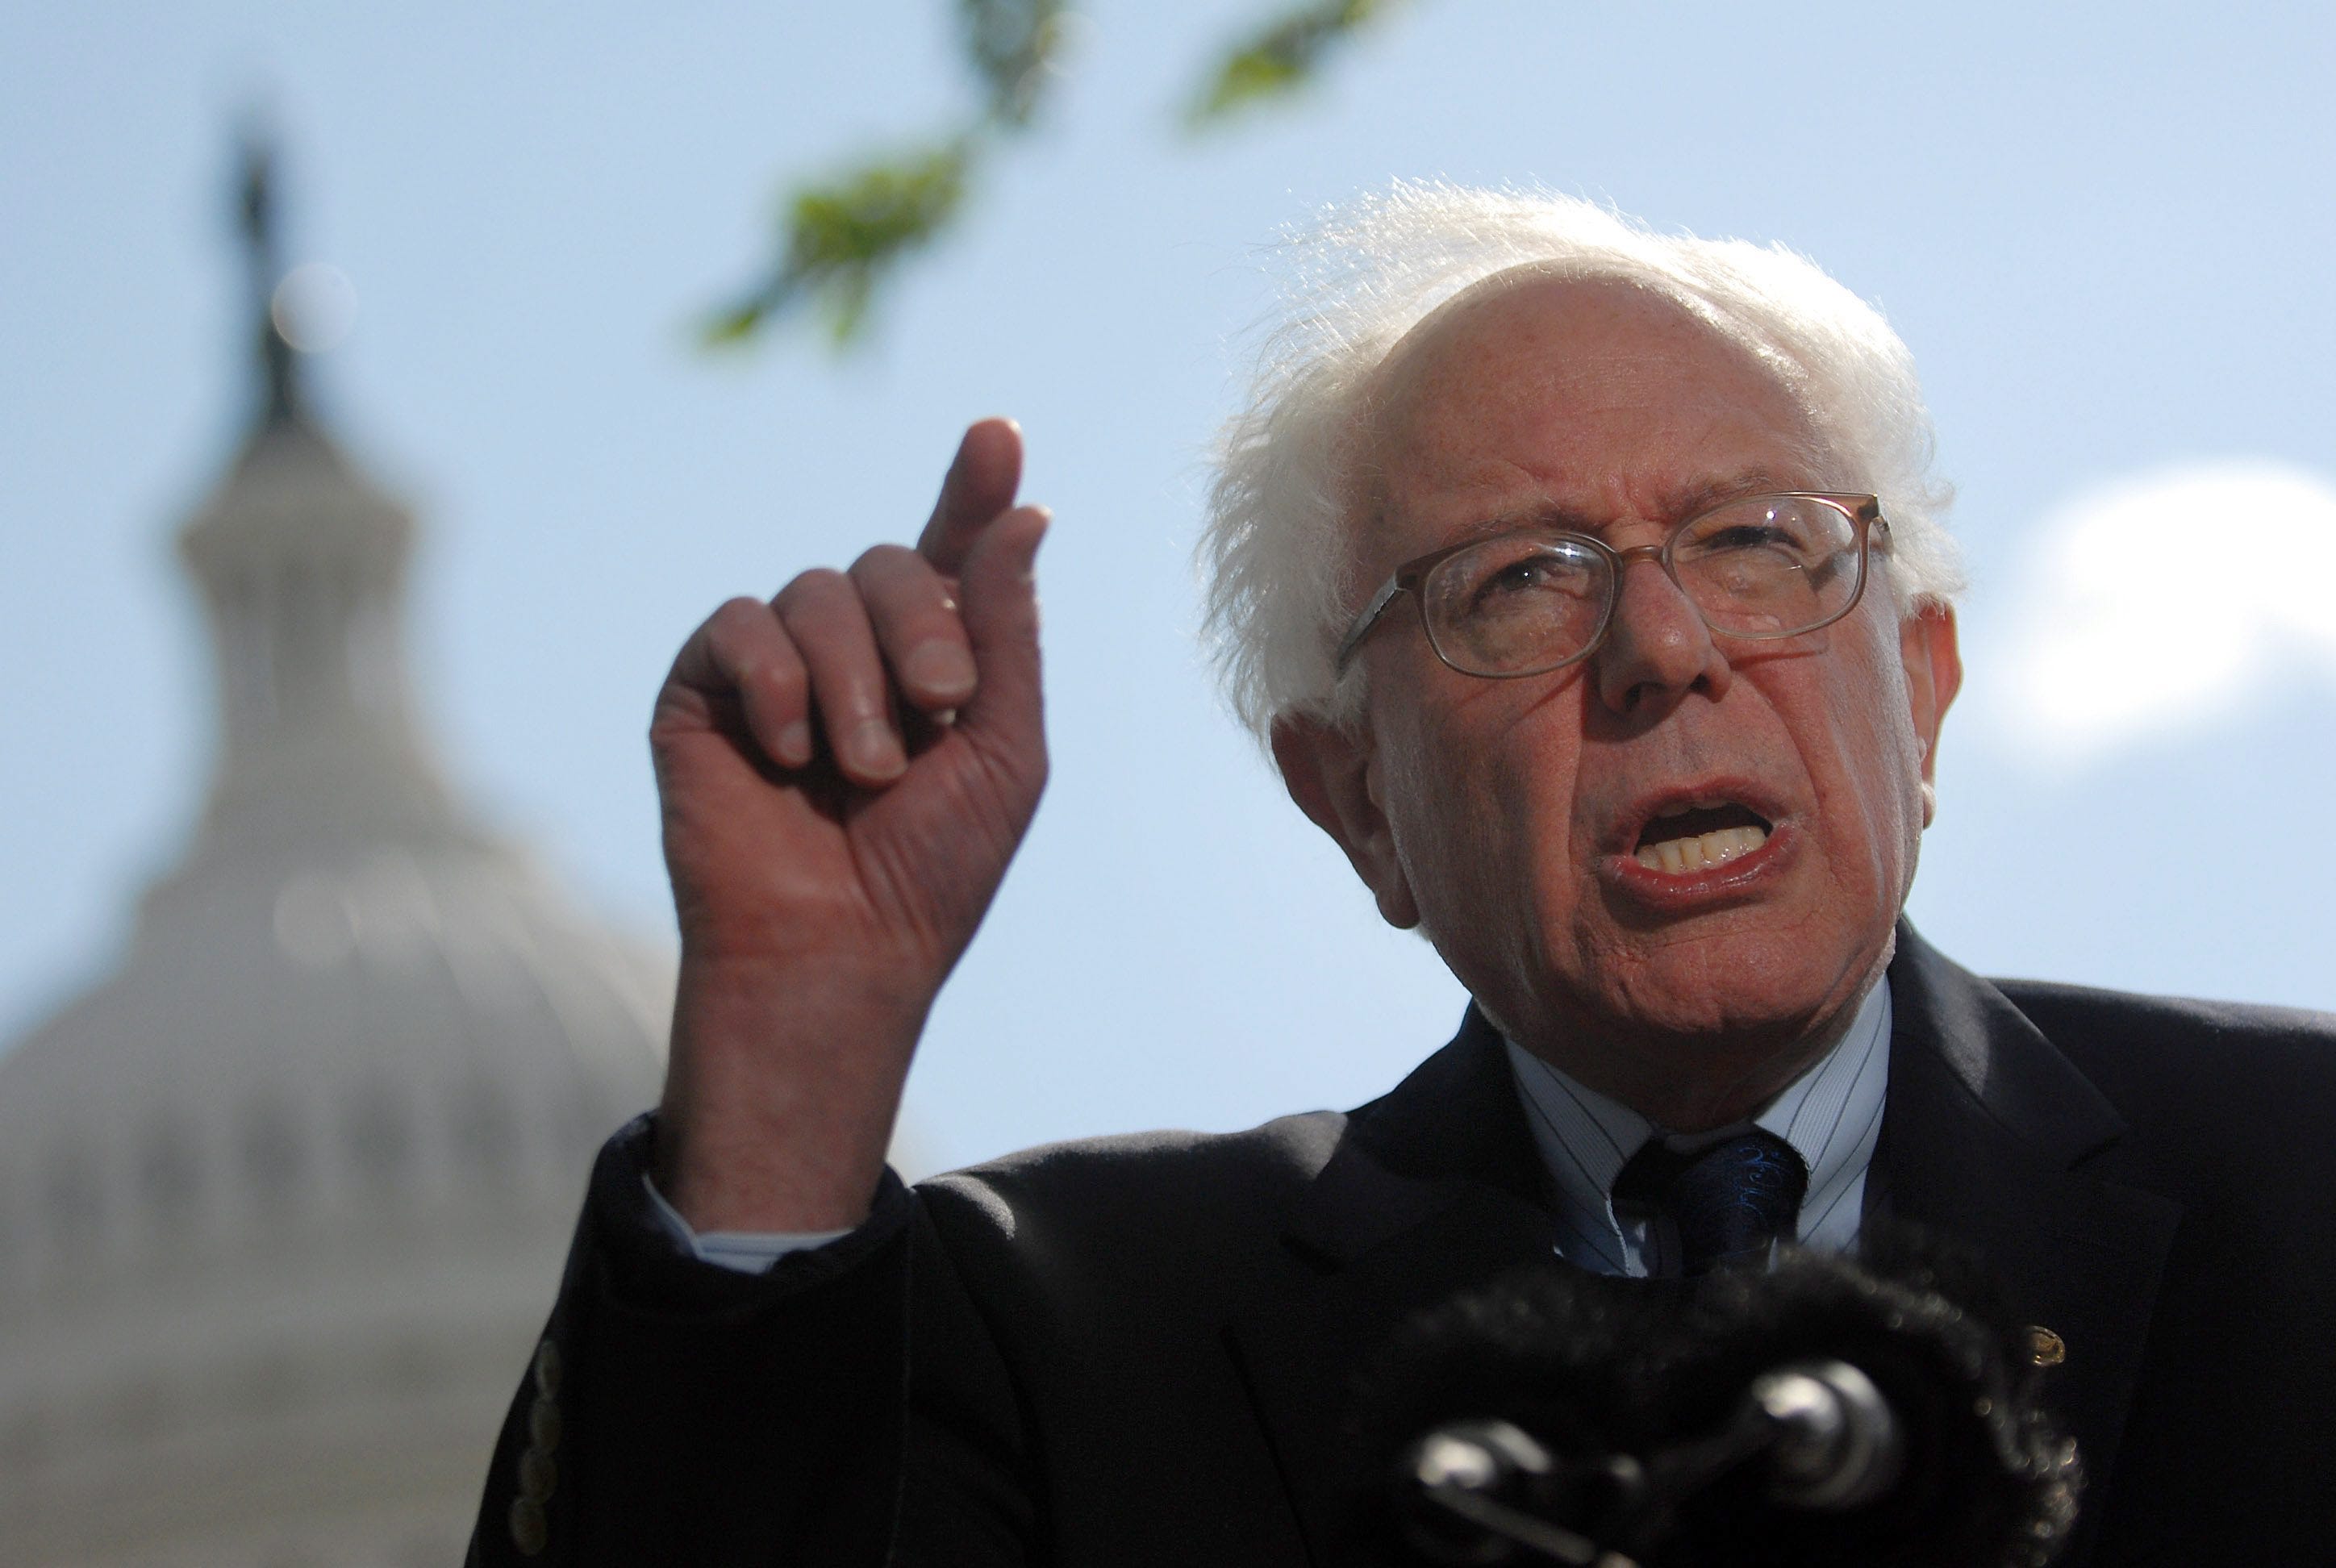 Sanders says his campaign will focus on struggling middle class